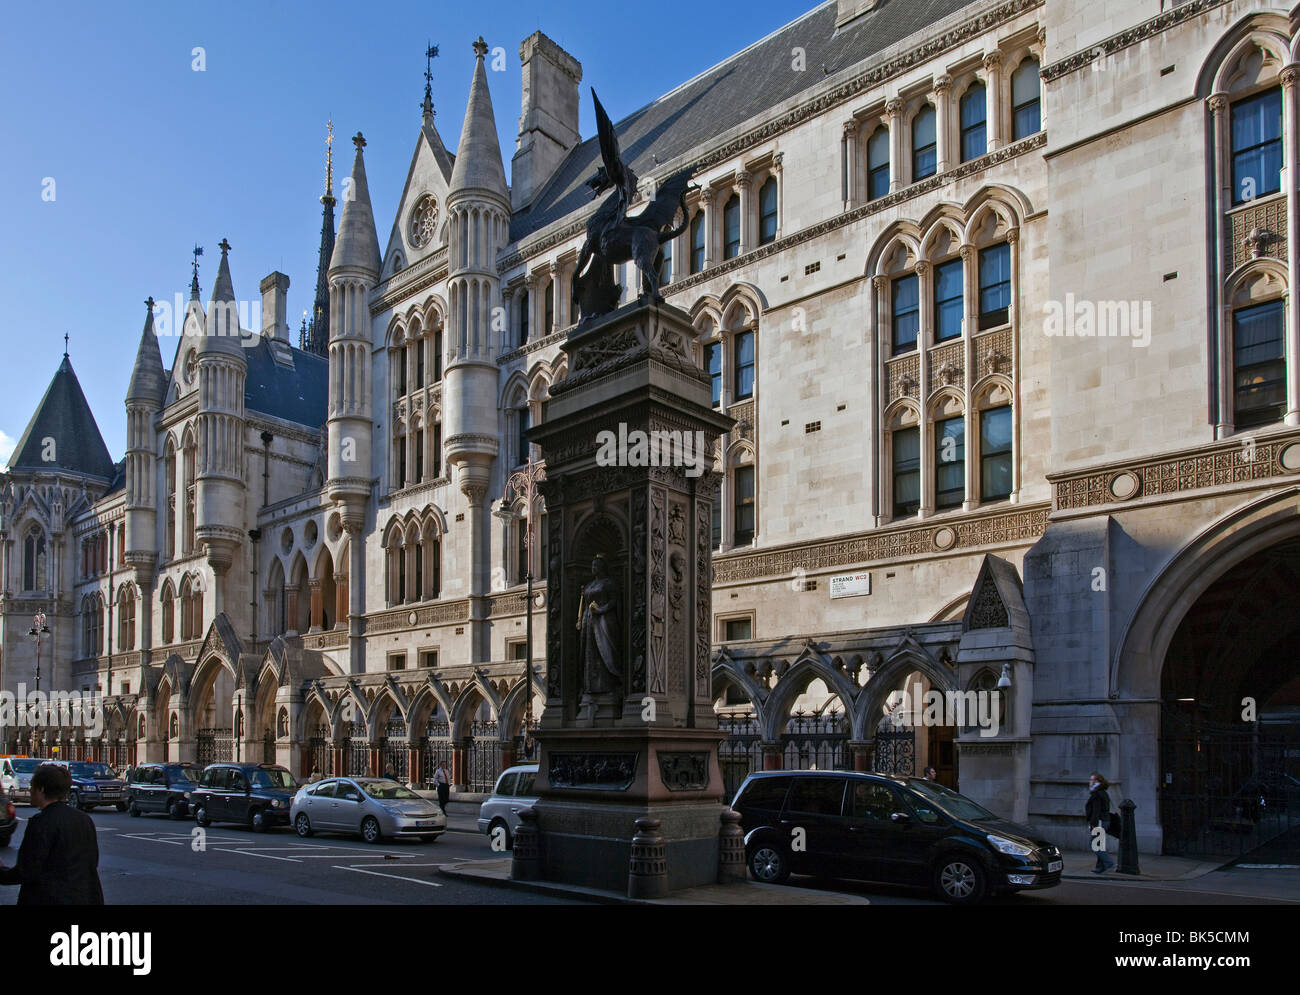 The High Court of Justice, London, UK Stock Photo